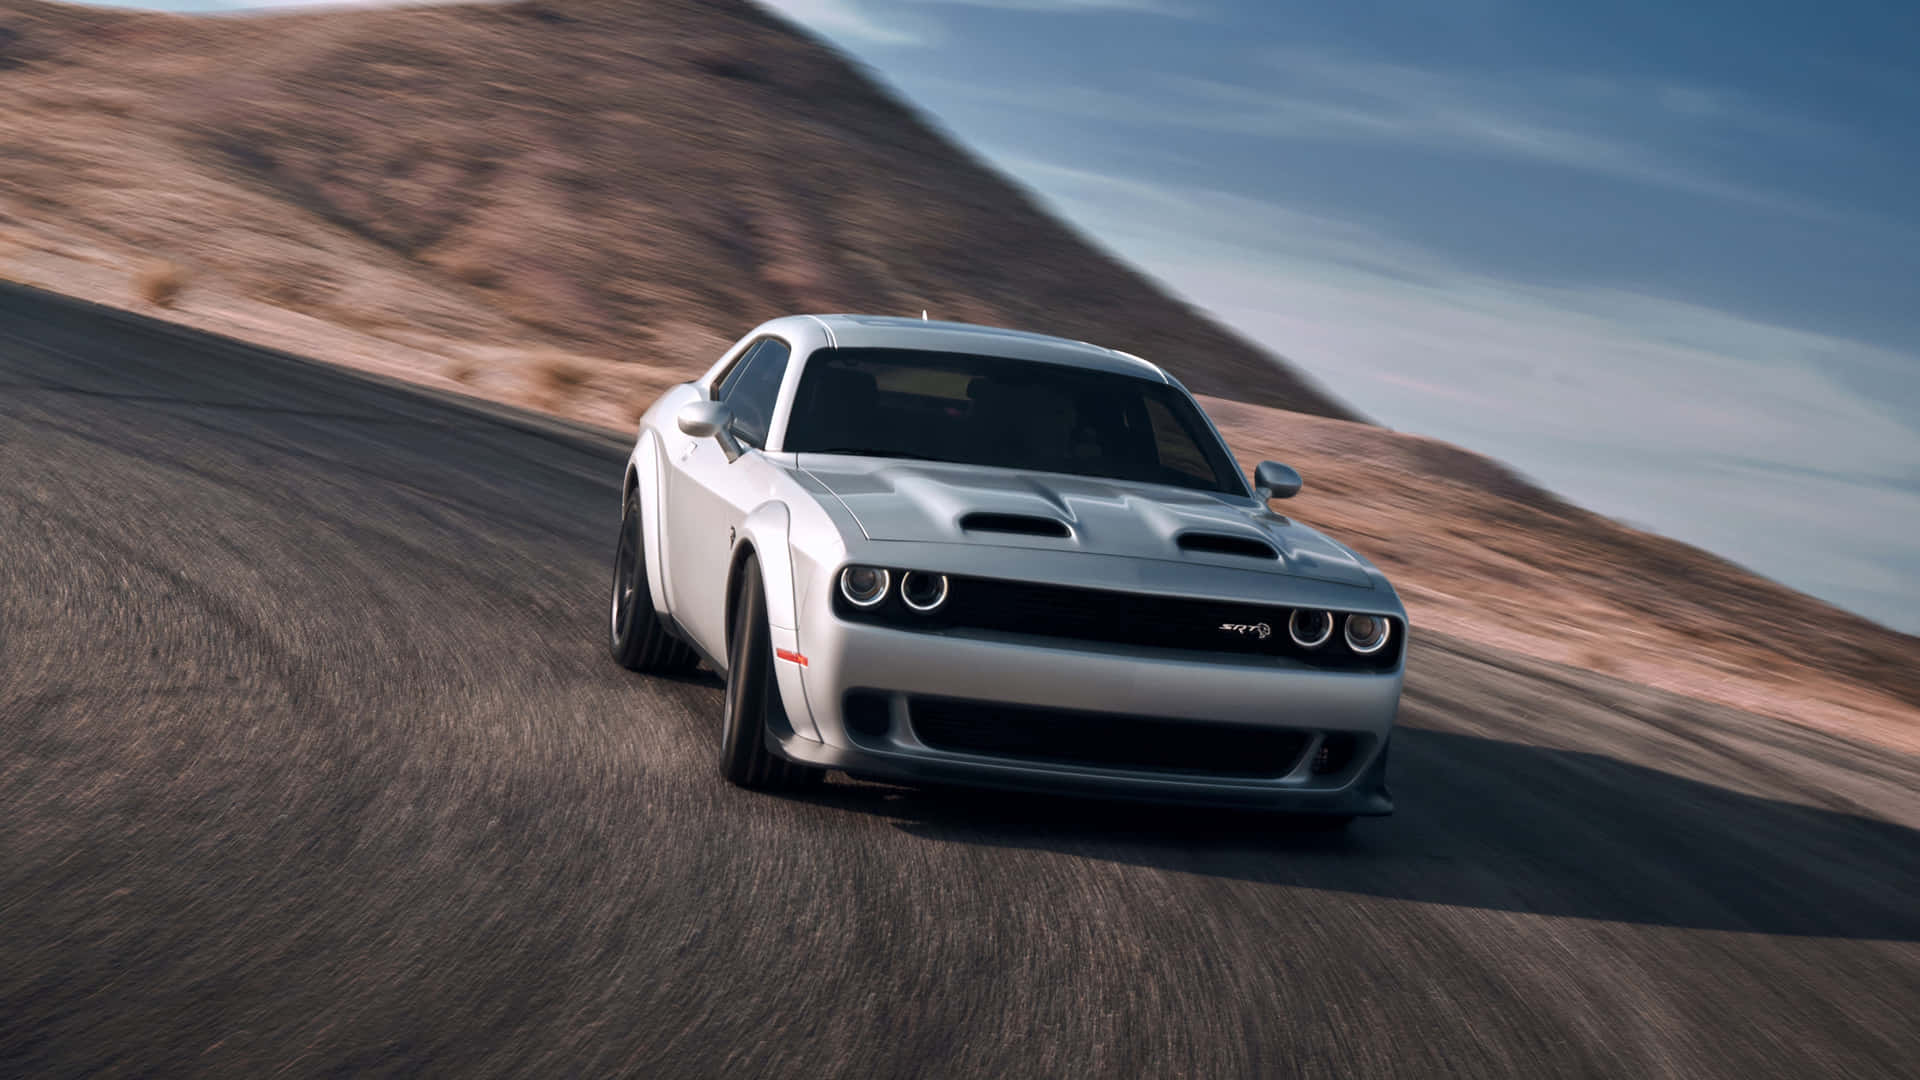 Explore The Open Road With The Dodge Hellcat Wallpaper